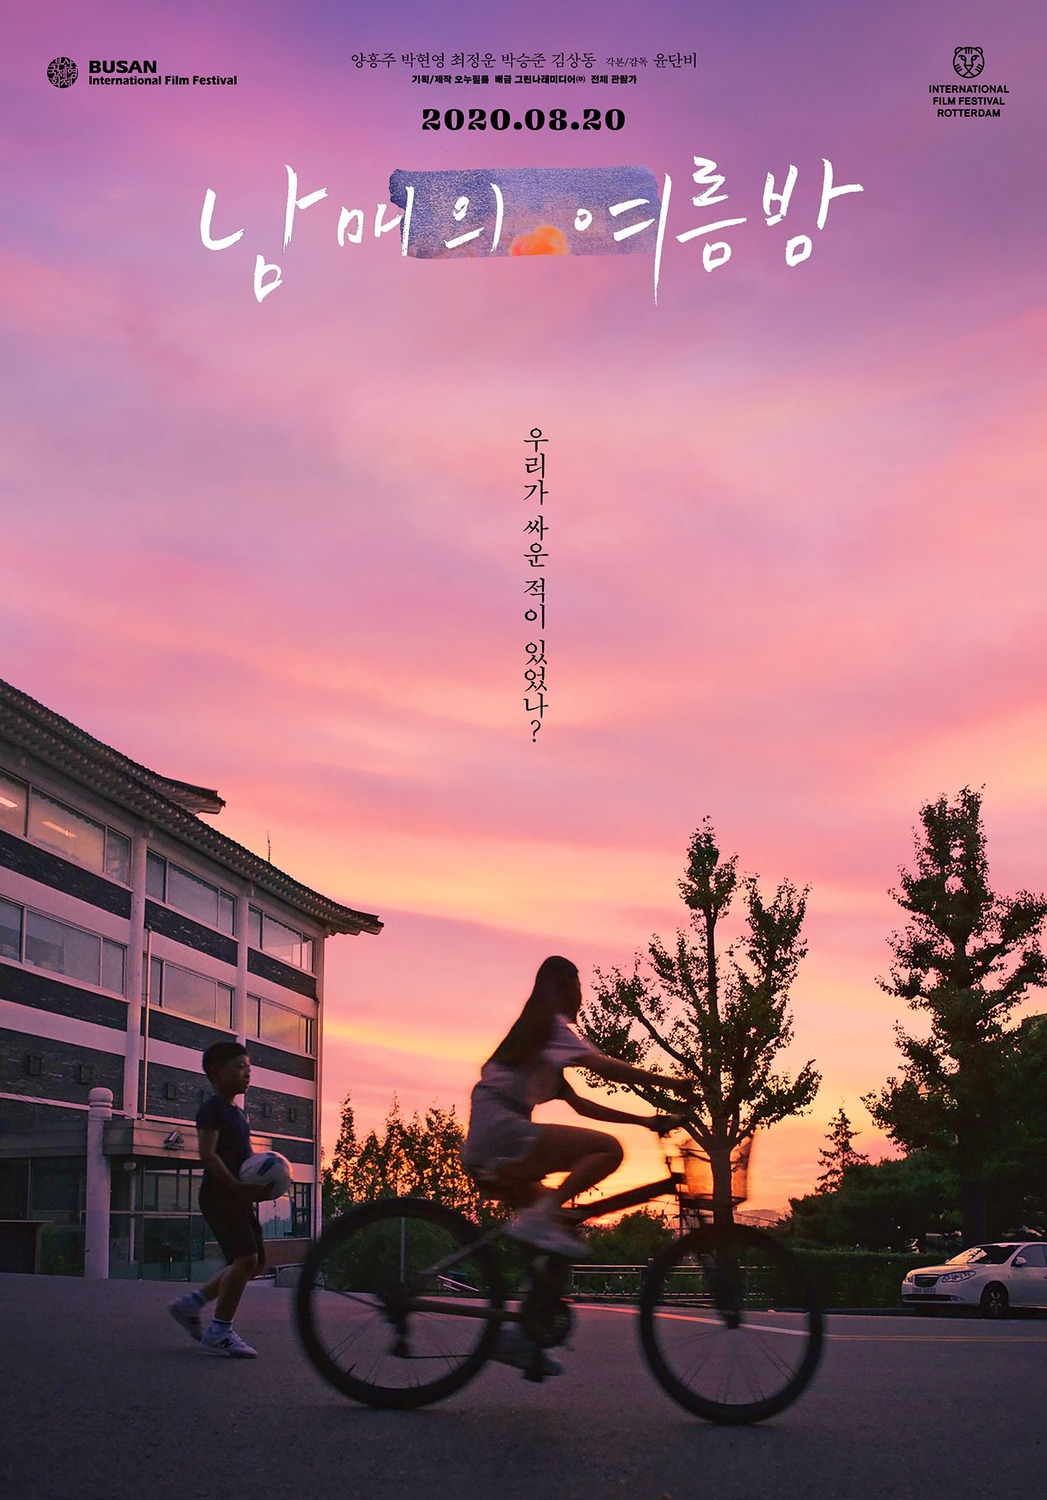 Extra Large Movie Poster Image for Nam-mae-wui Yeo-reum-bam 